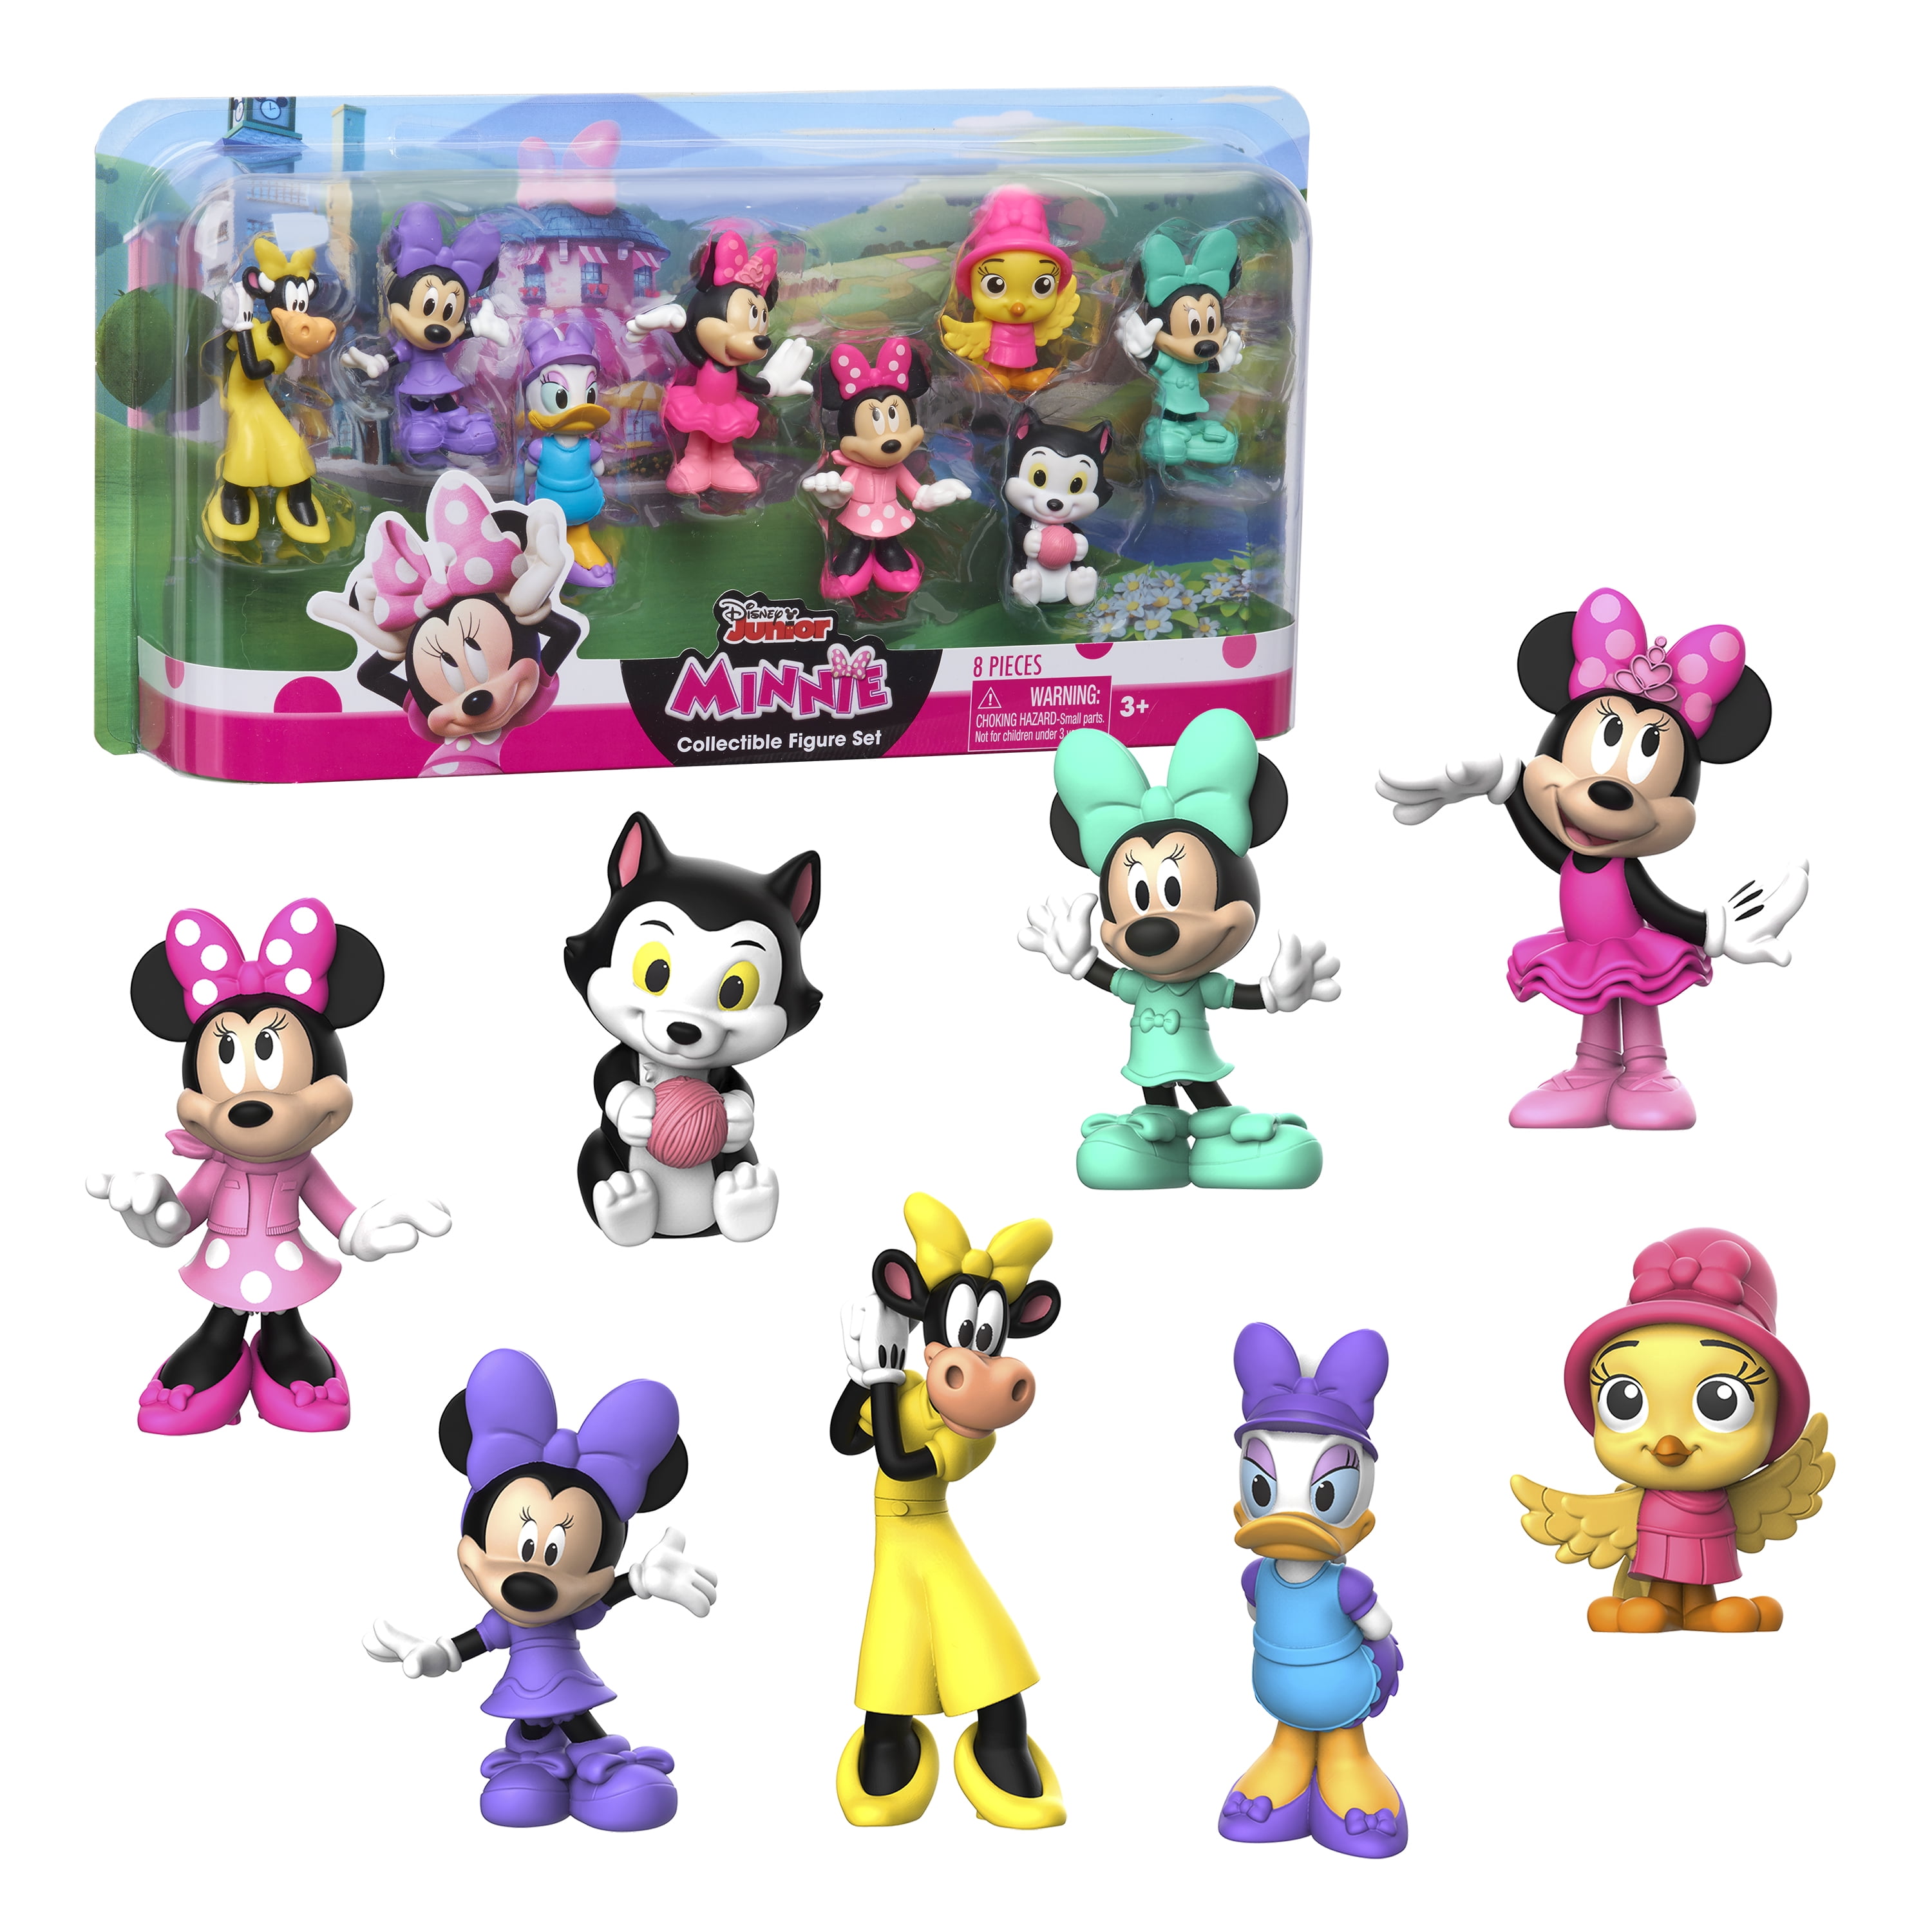 New Disney Junior Muppet Babies 8 Figure Collectible Set-Play Toy Figurines